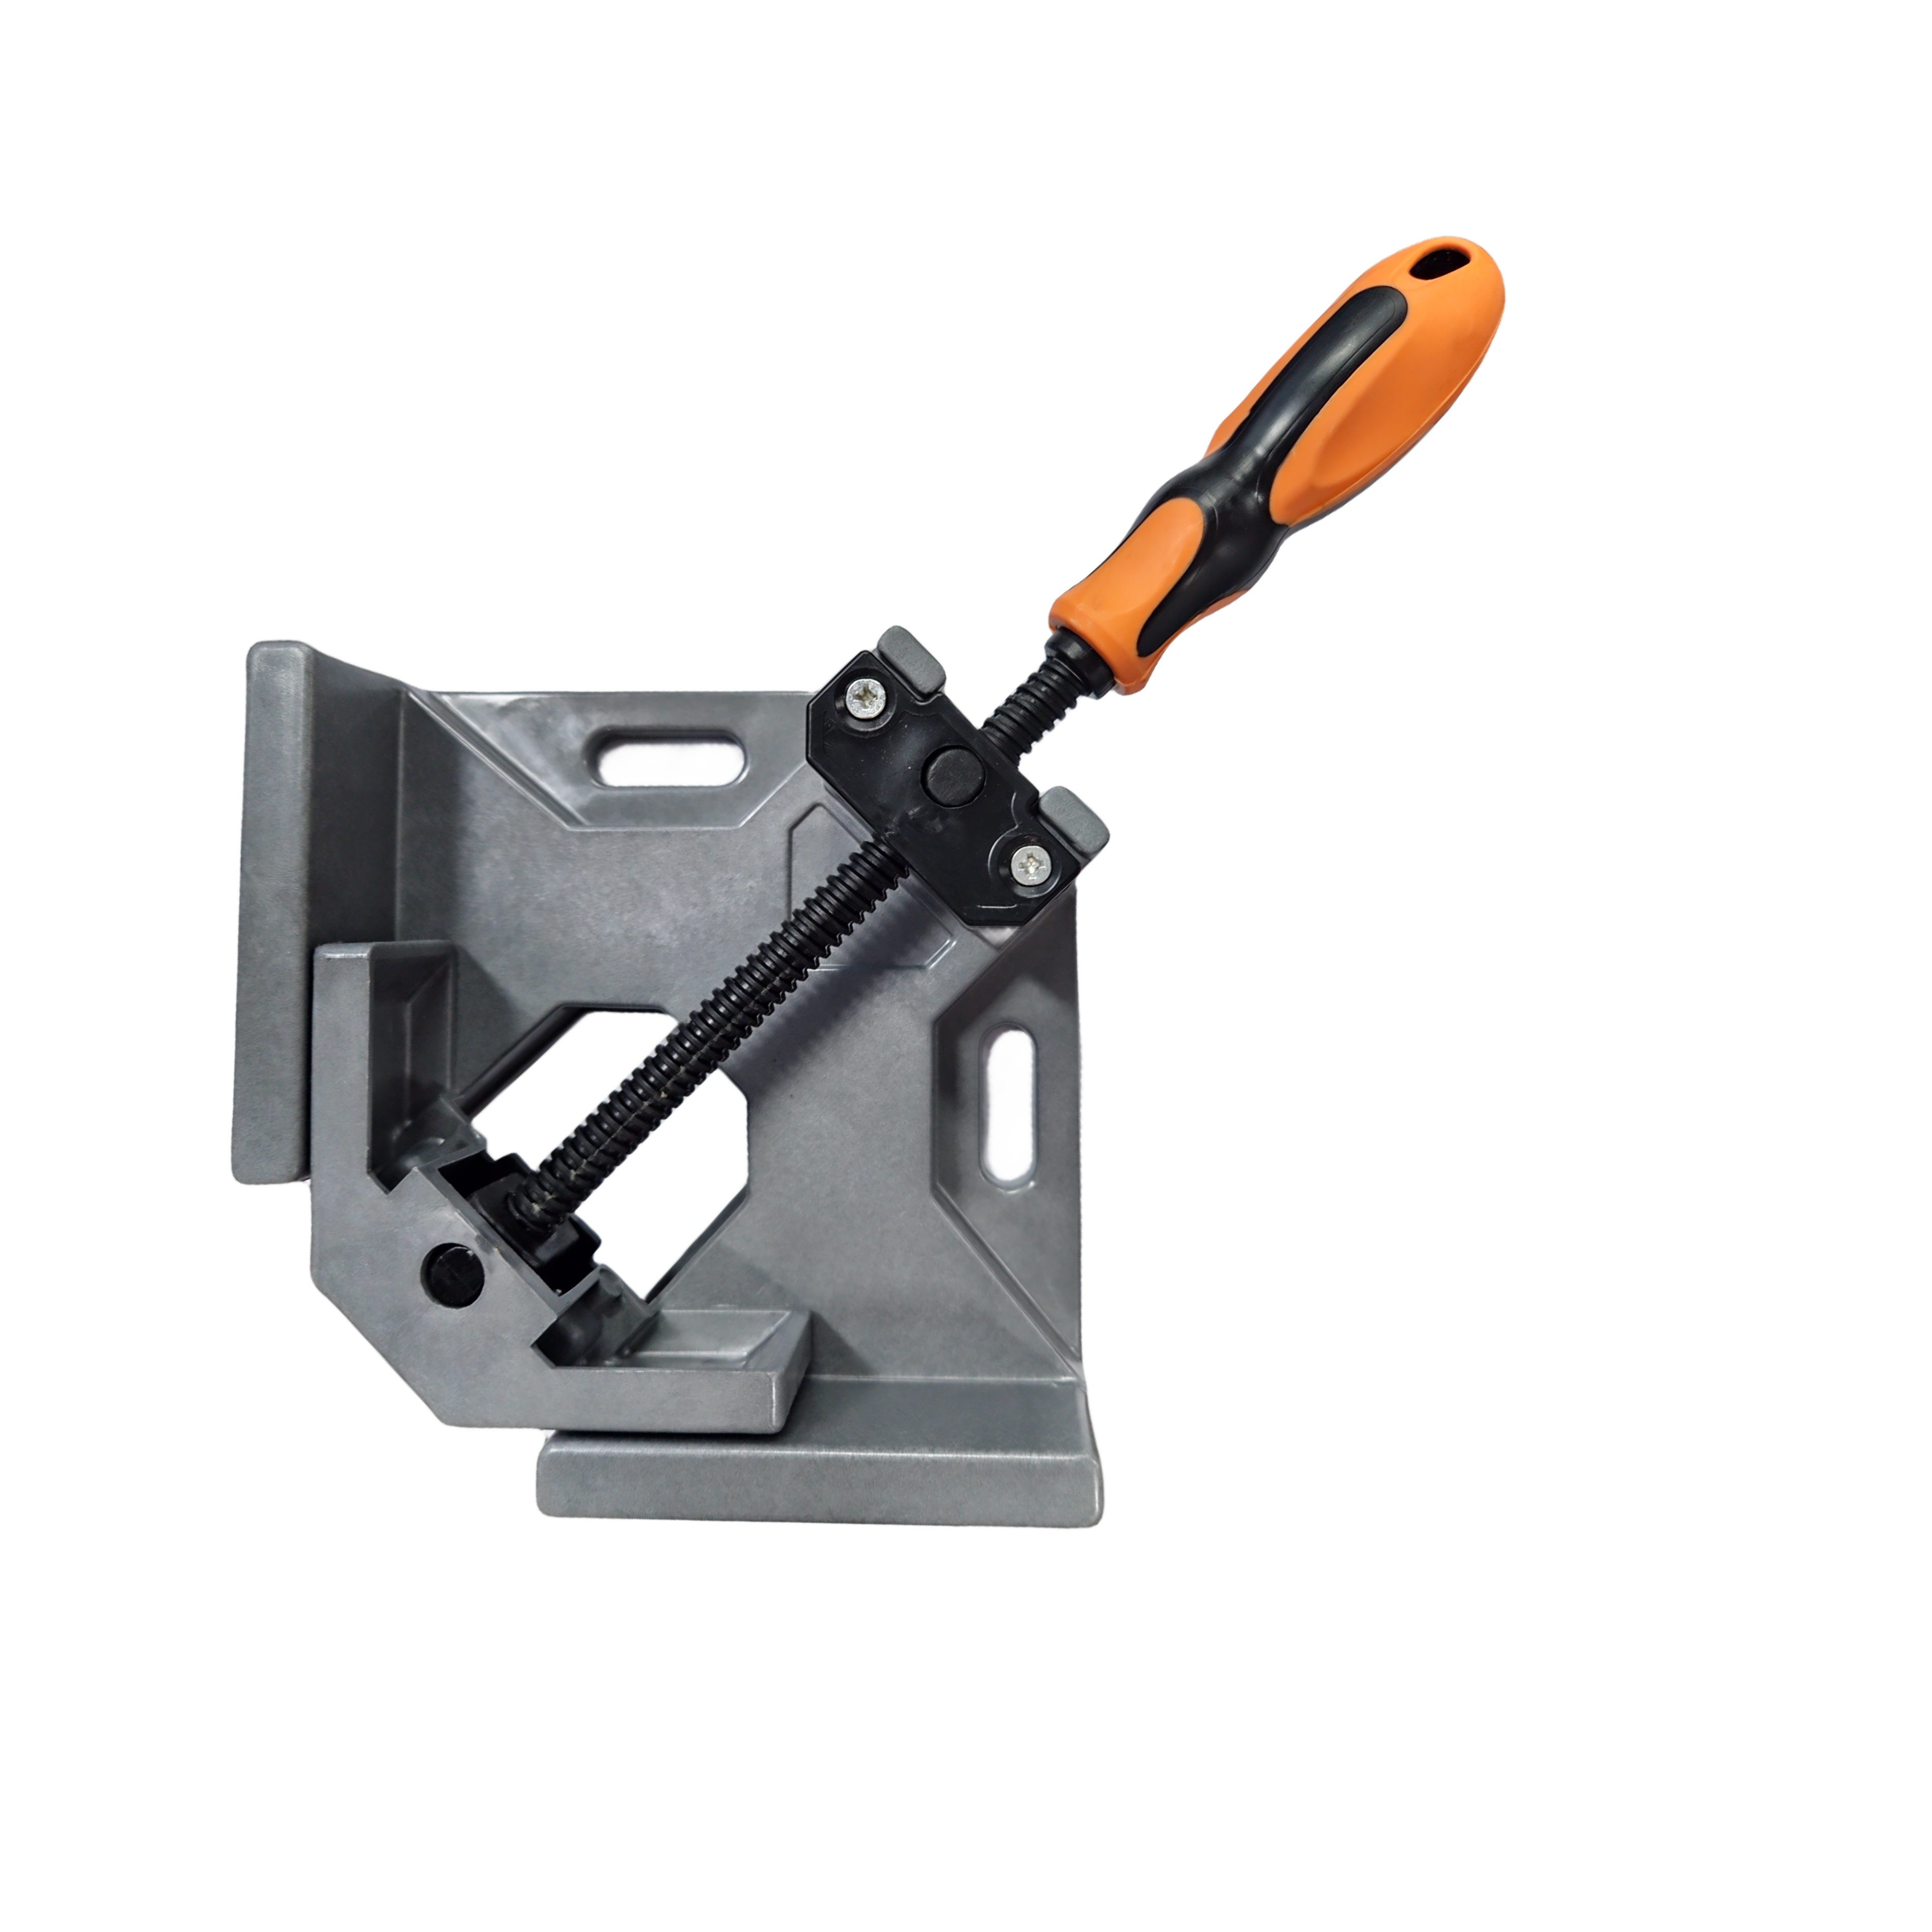 Corner Clamps for Woodworking, Aluminum Alloy 90 Degree Clamp with